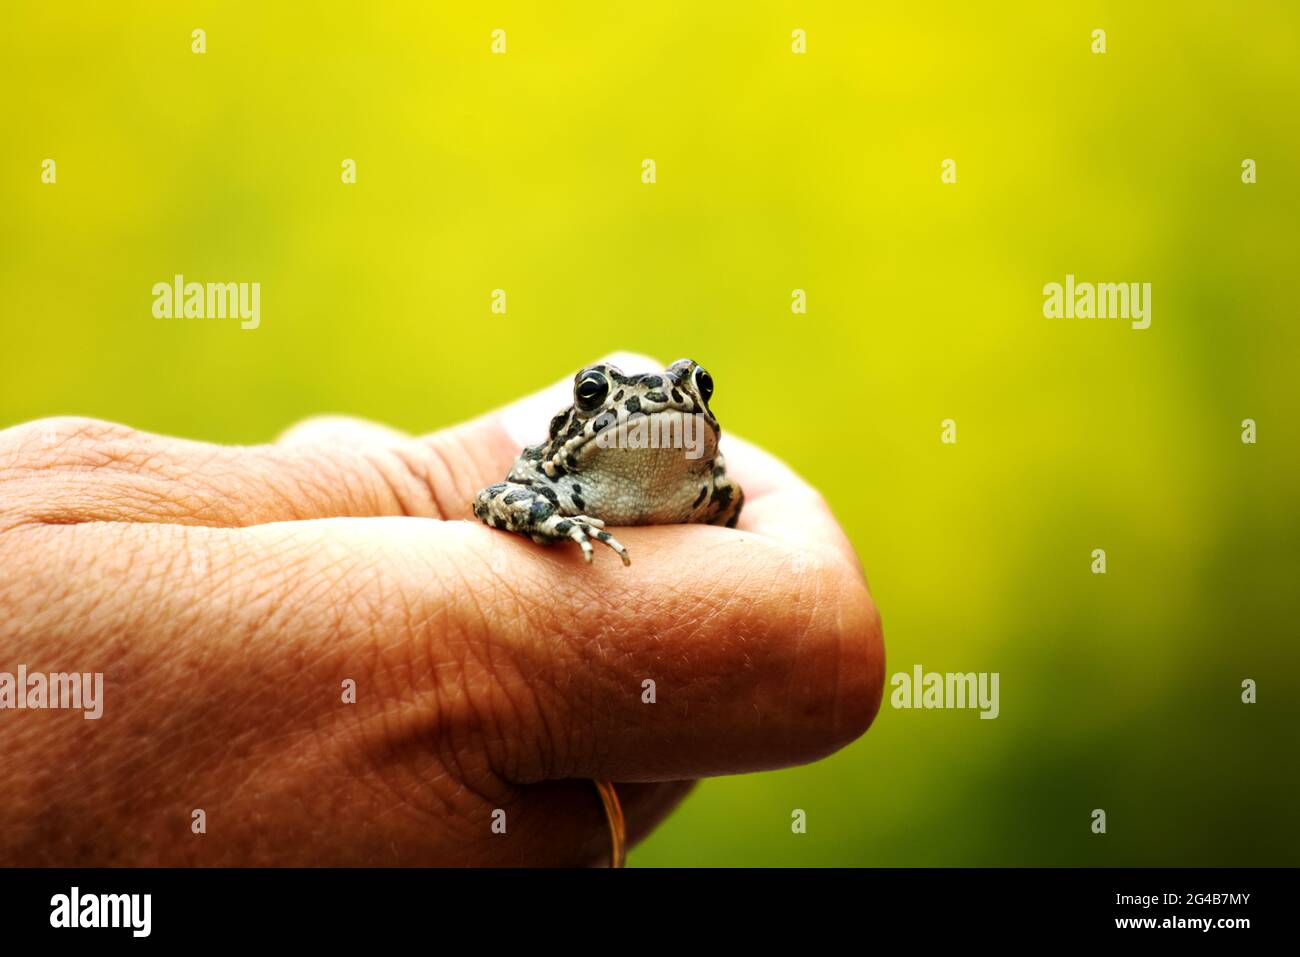 Close-up of human hand holding a tiny frog on a green blurred background Stock Photo